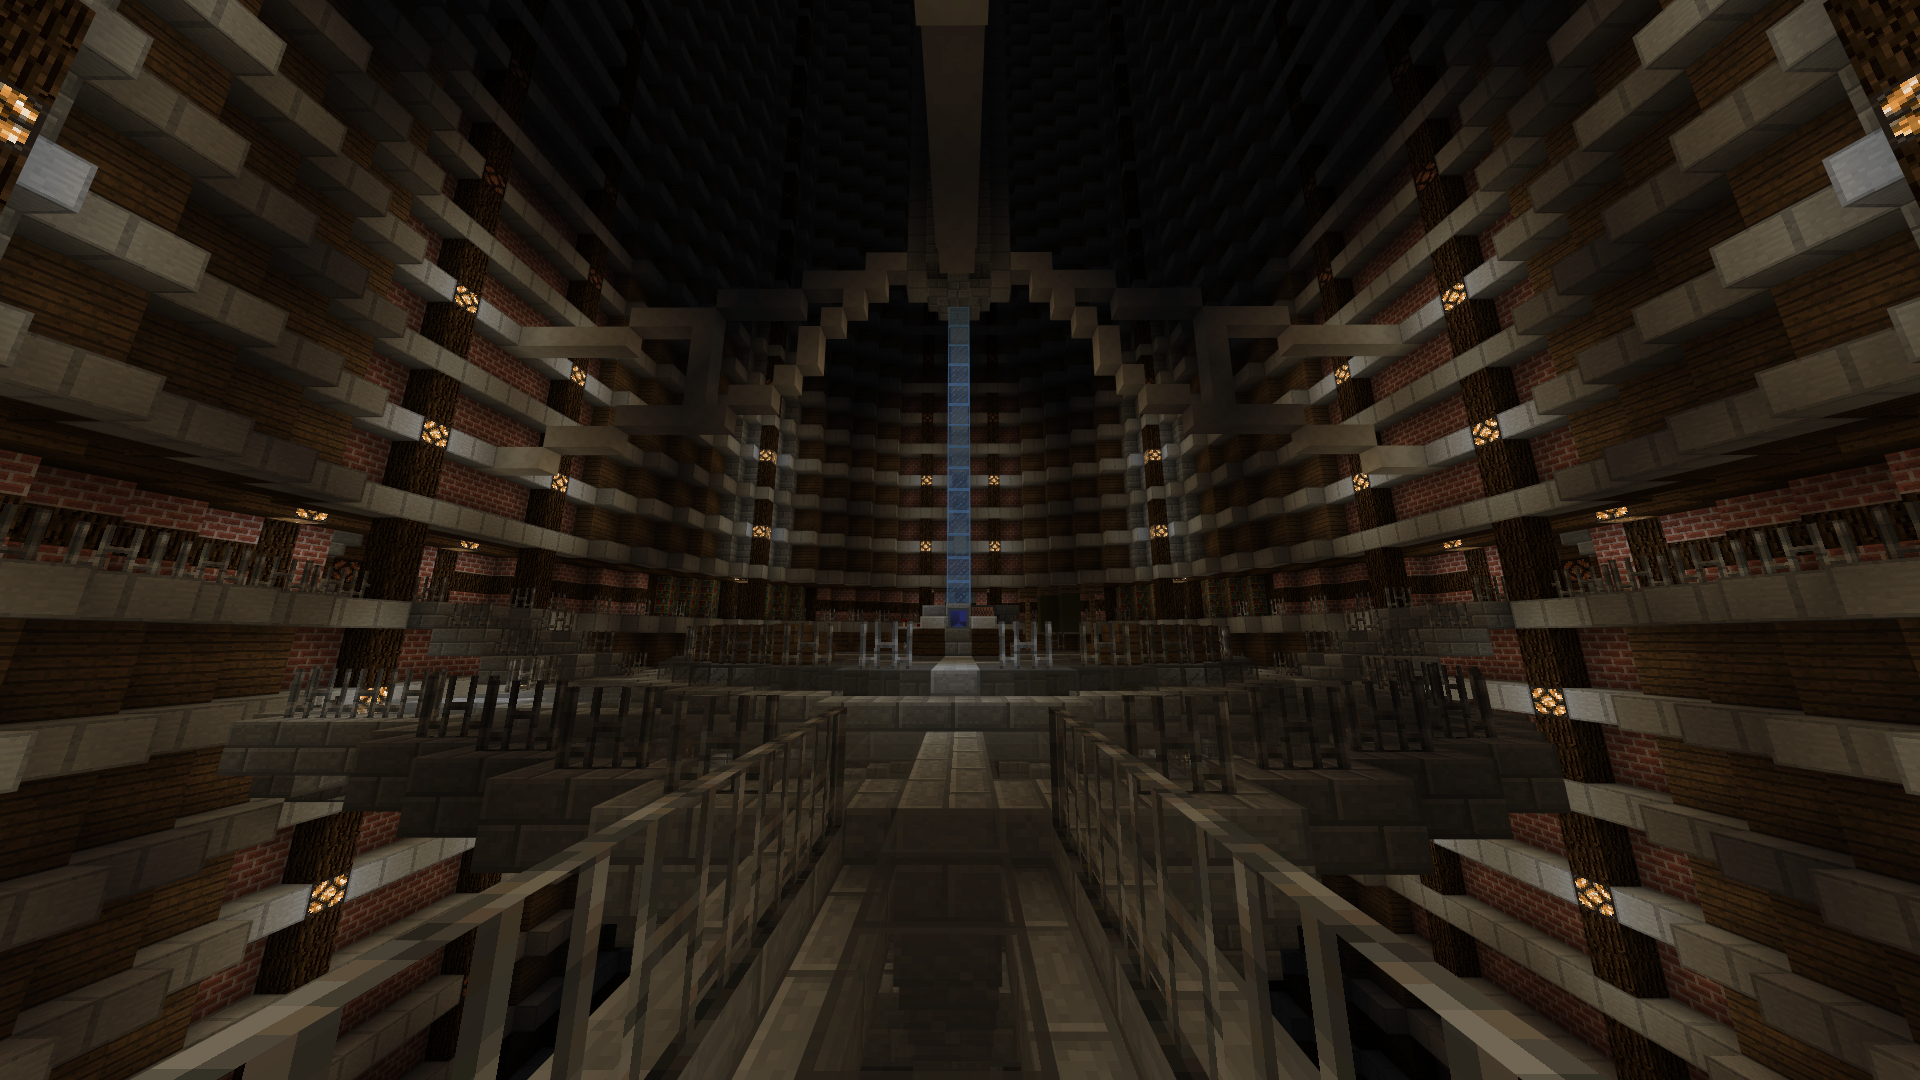 1920x1080 Custom TARDIS interior I made. Posted this month's ago on r/doctor who, friend said I should post it here to : r/Minecraft